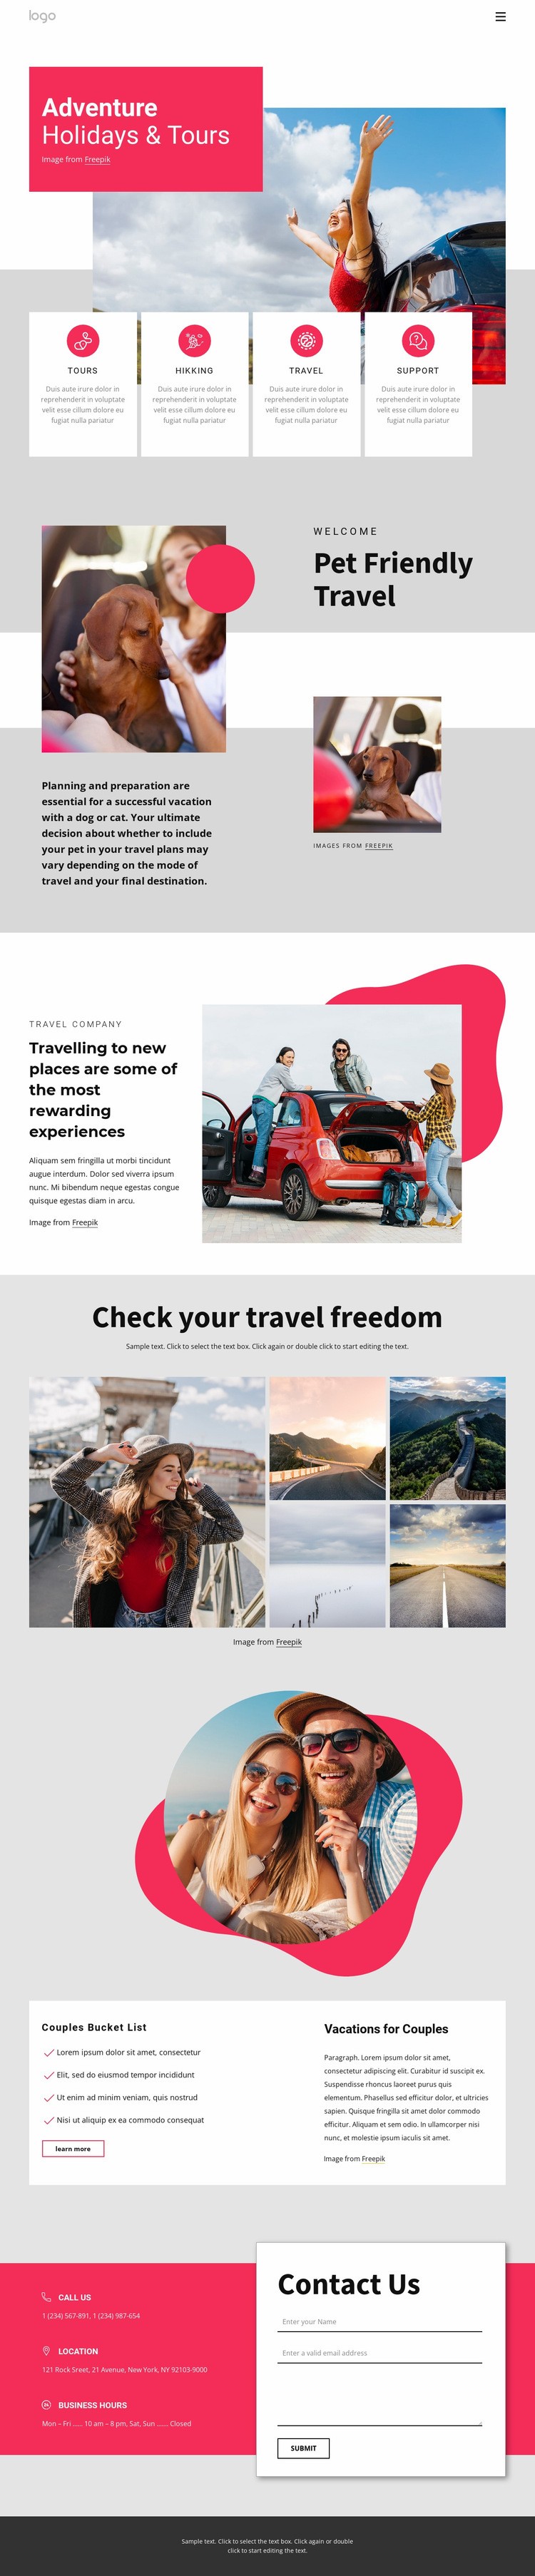 Adventure holidays and tours Squarespace Template Alternative